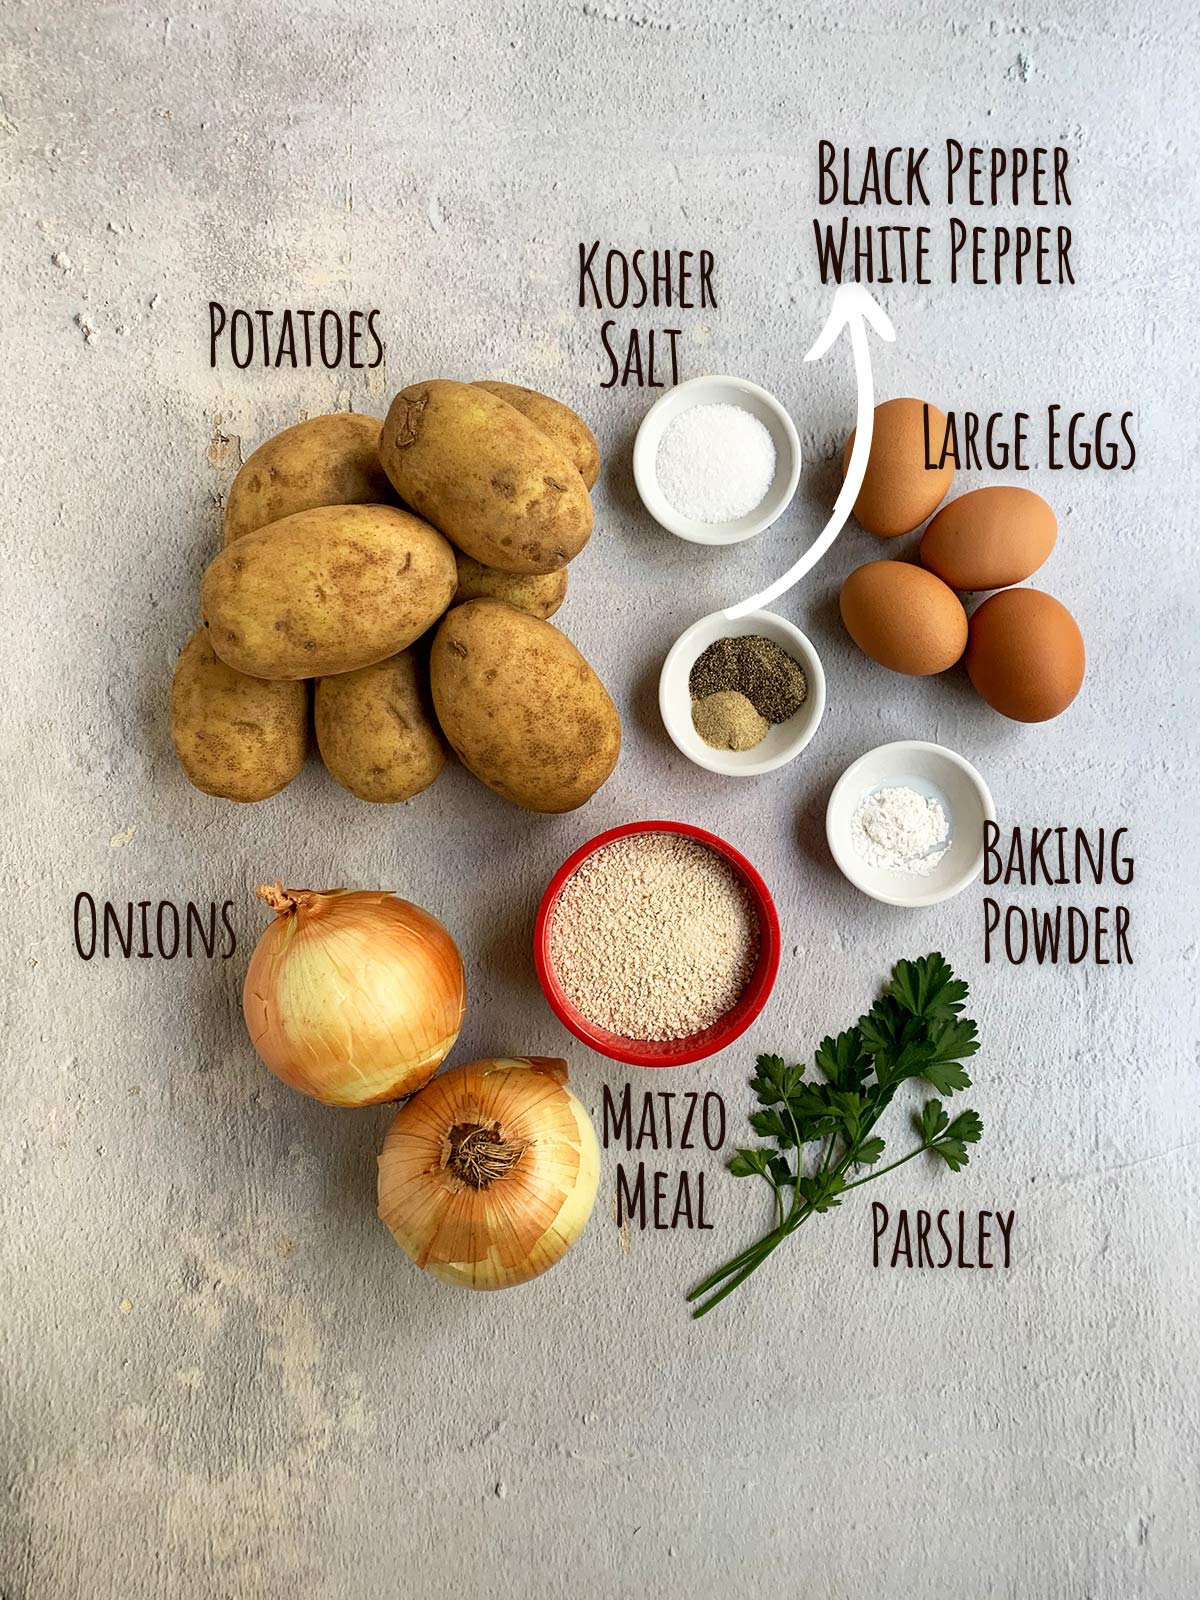 Ingredient shot for crispy potato pancakes showing potatoes, onions, matzo meal, eggs, spices and parsley.